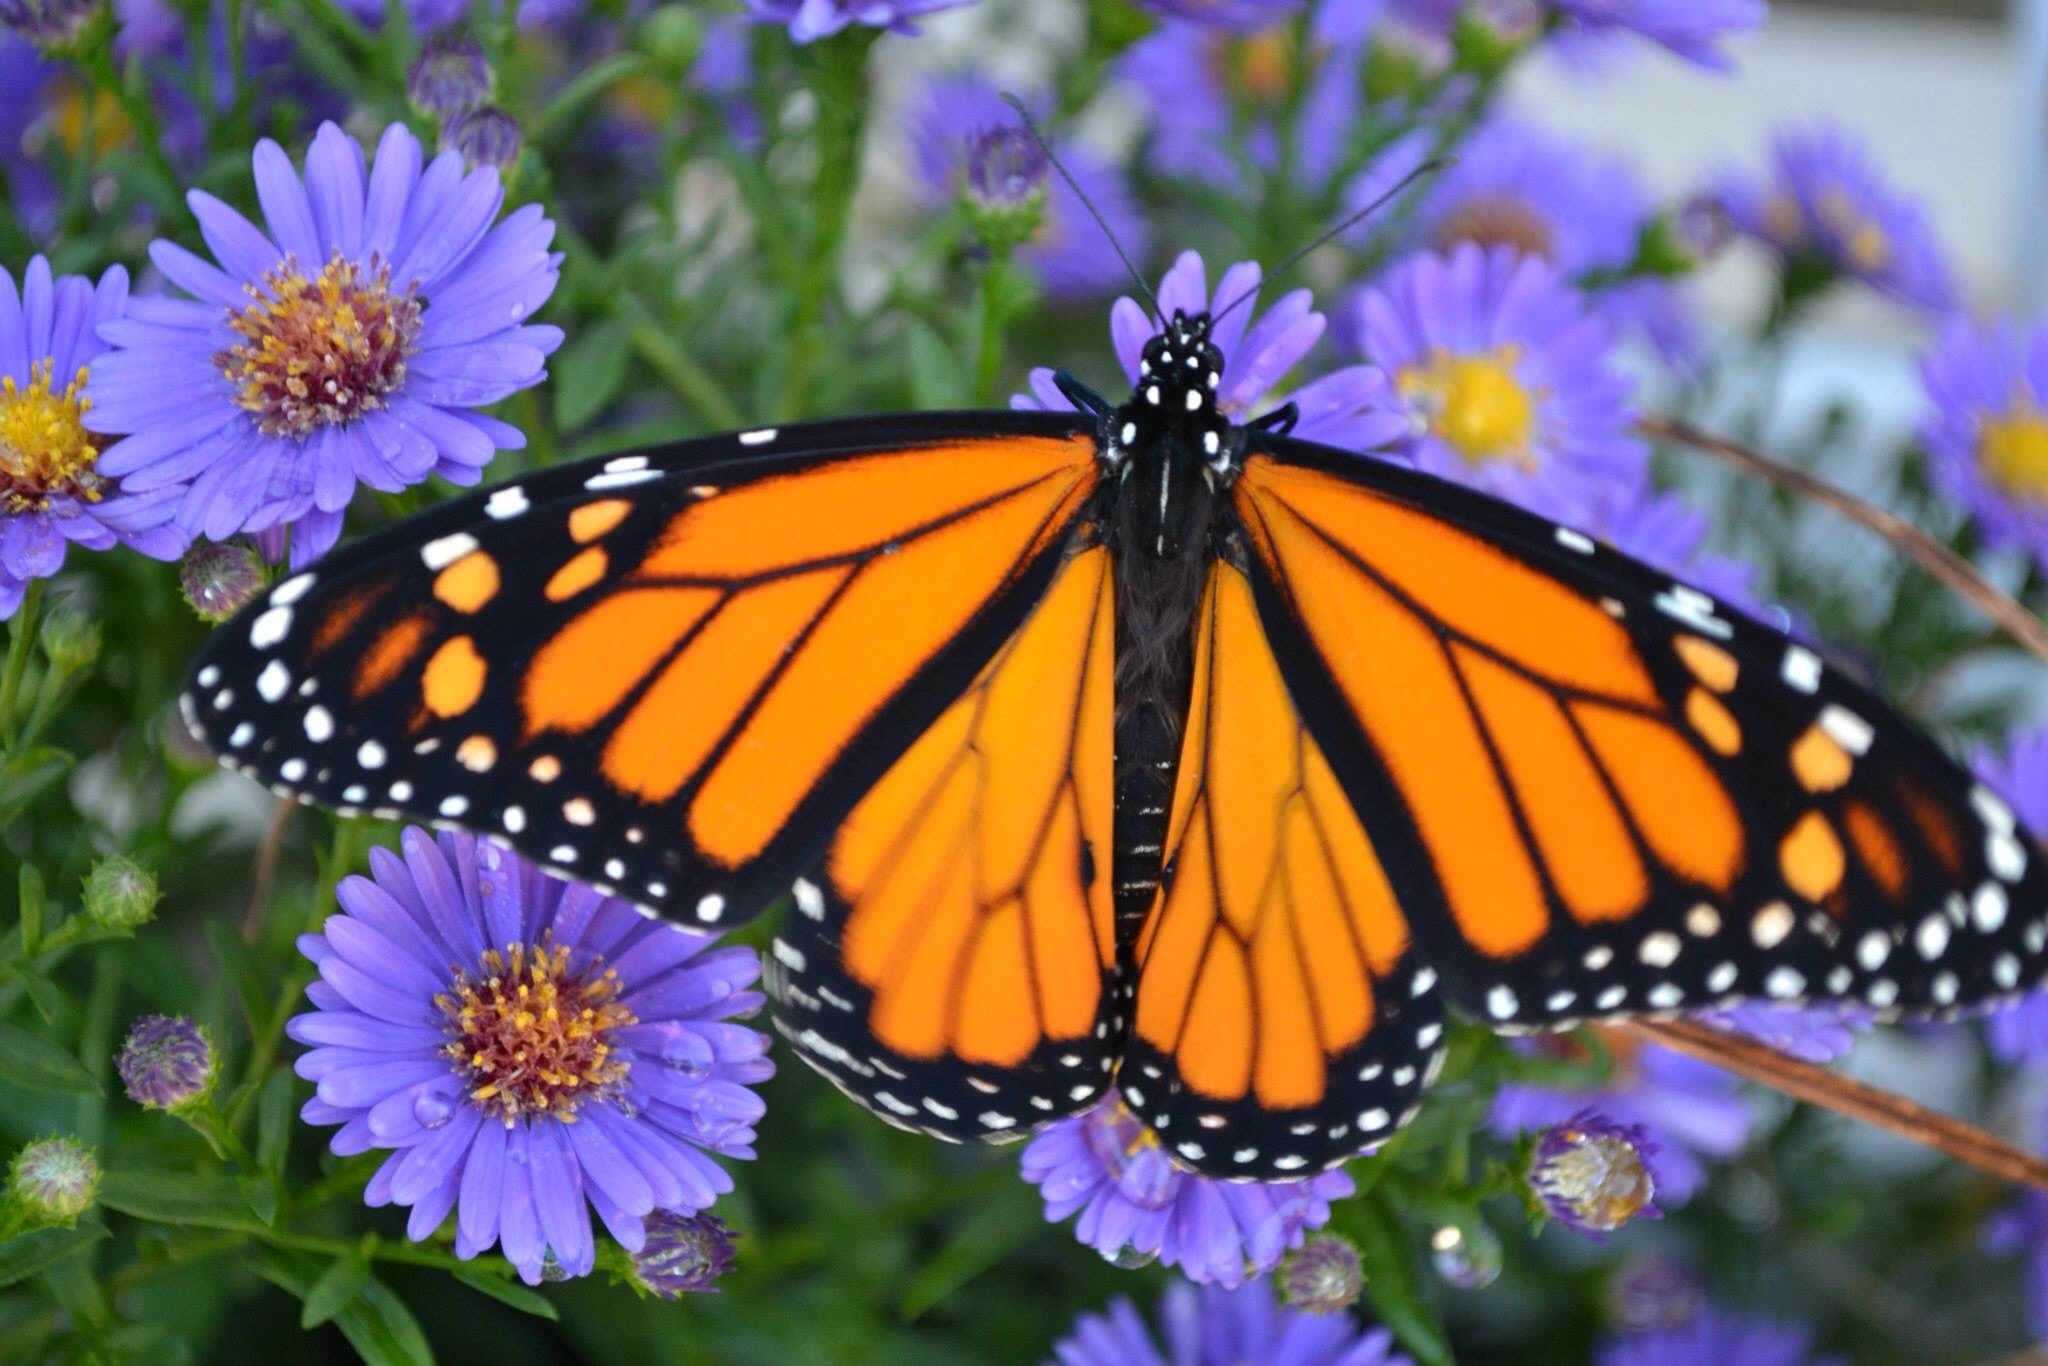 Monarch butterfly. at Coastal Maine Botanical Gardens
Boothbay Harbor, ME
#BestOf5